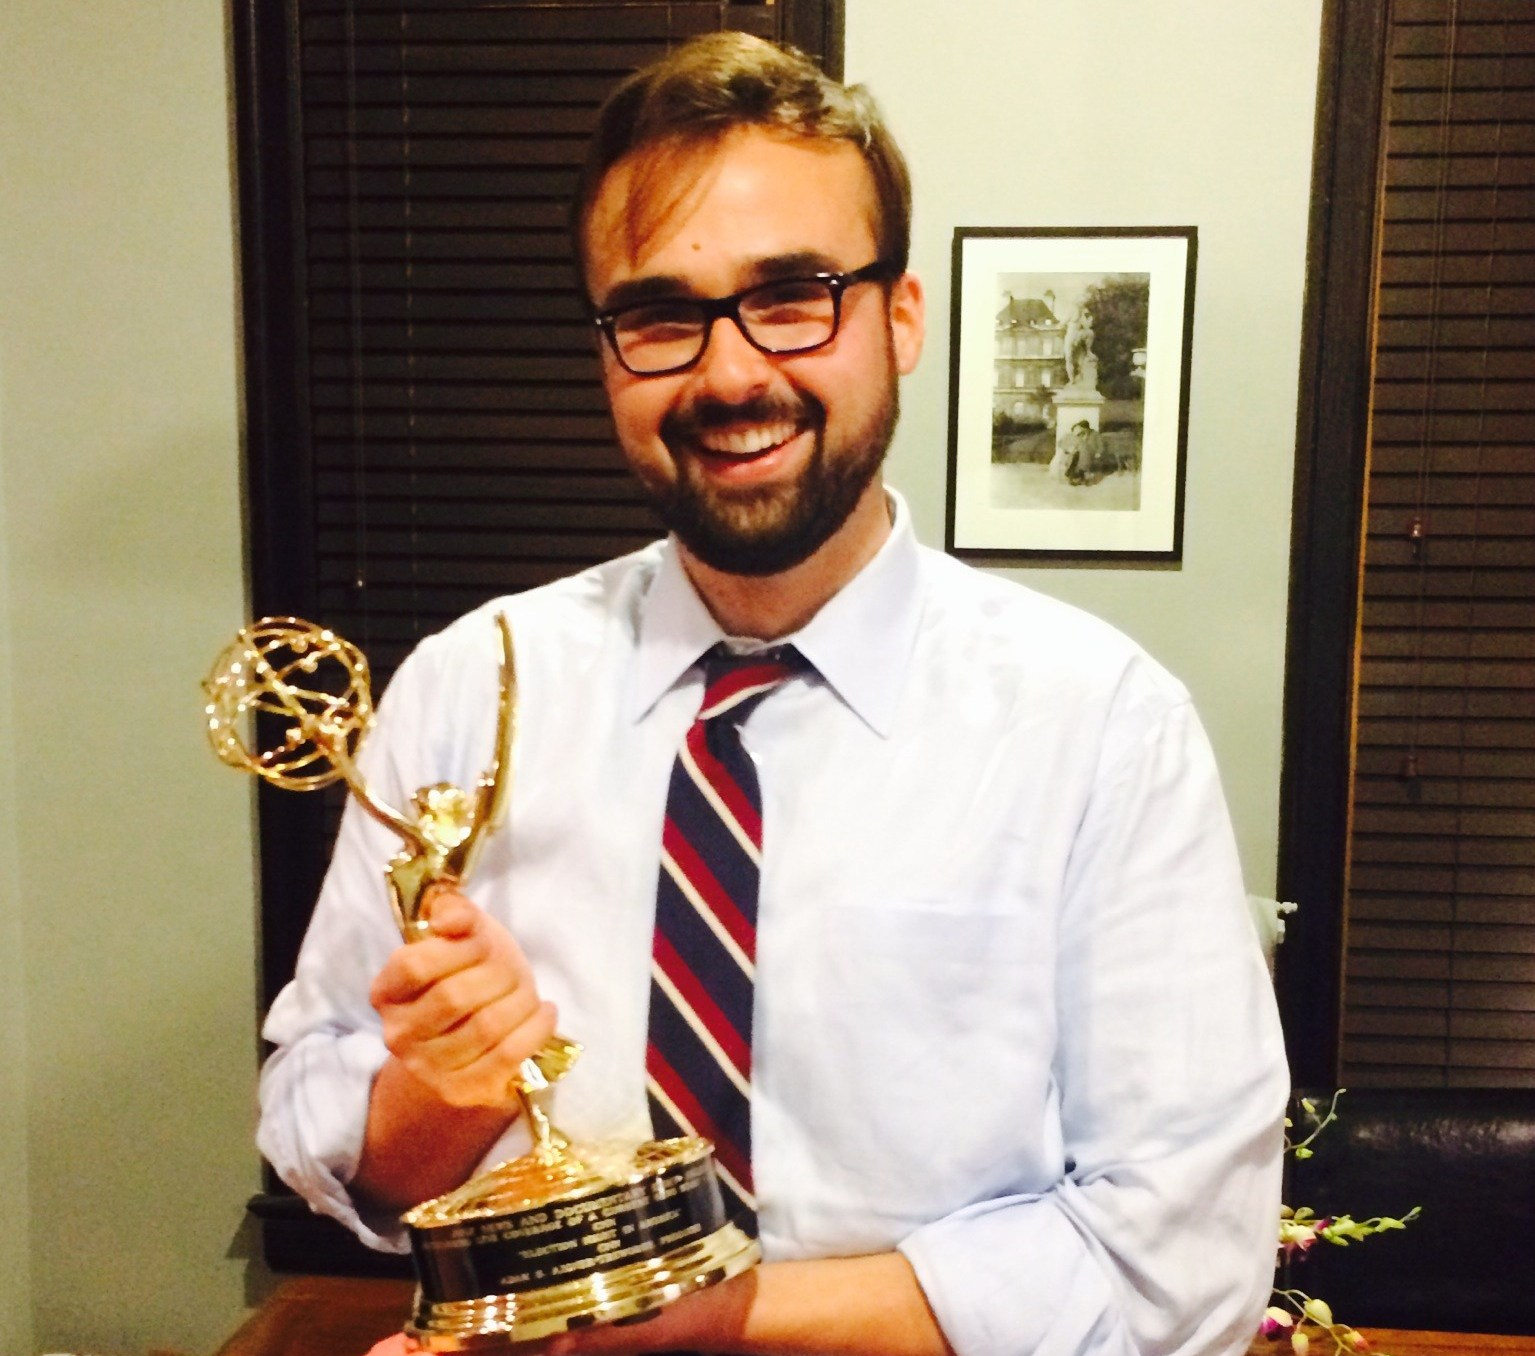 Adam and CNN team won an Emmy award for 2012 election night coverage